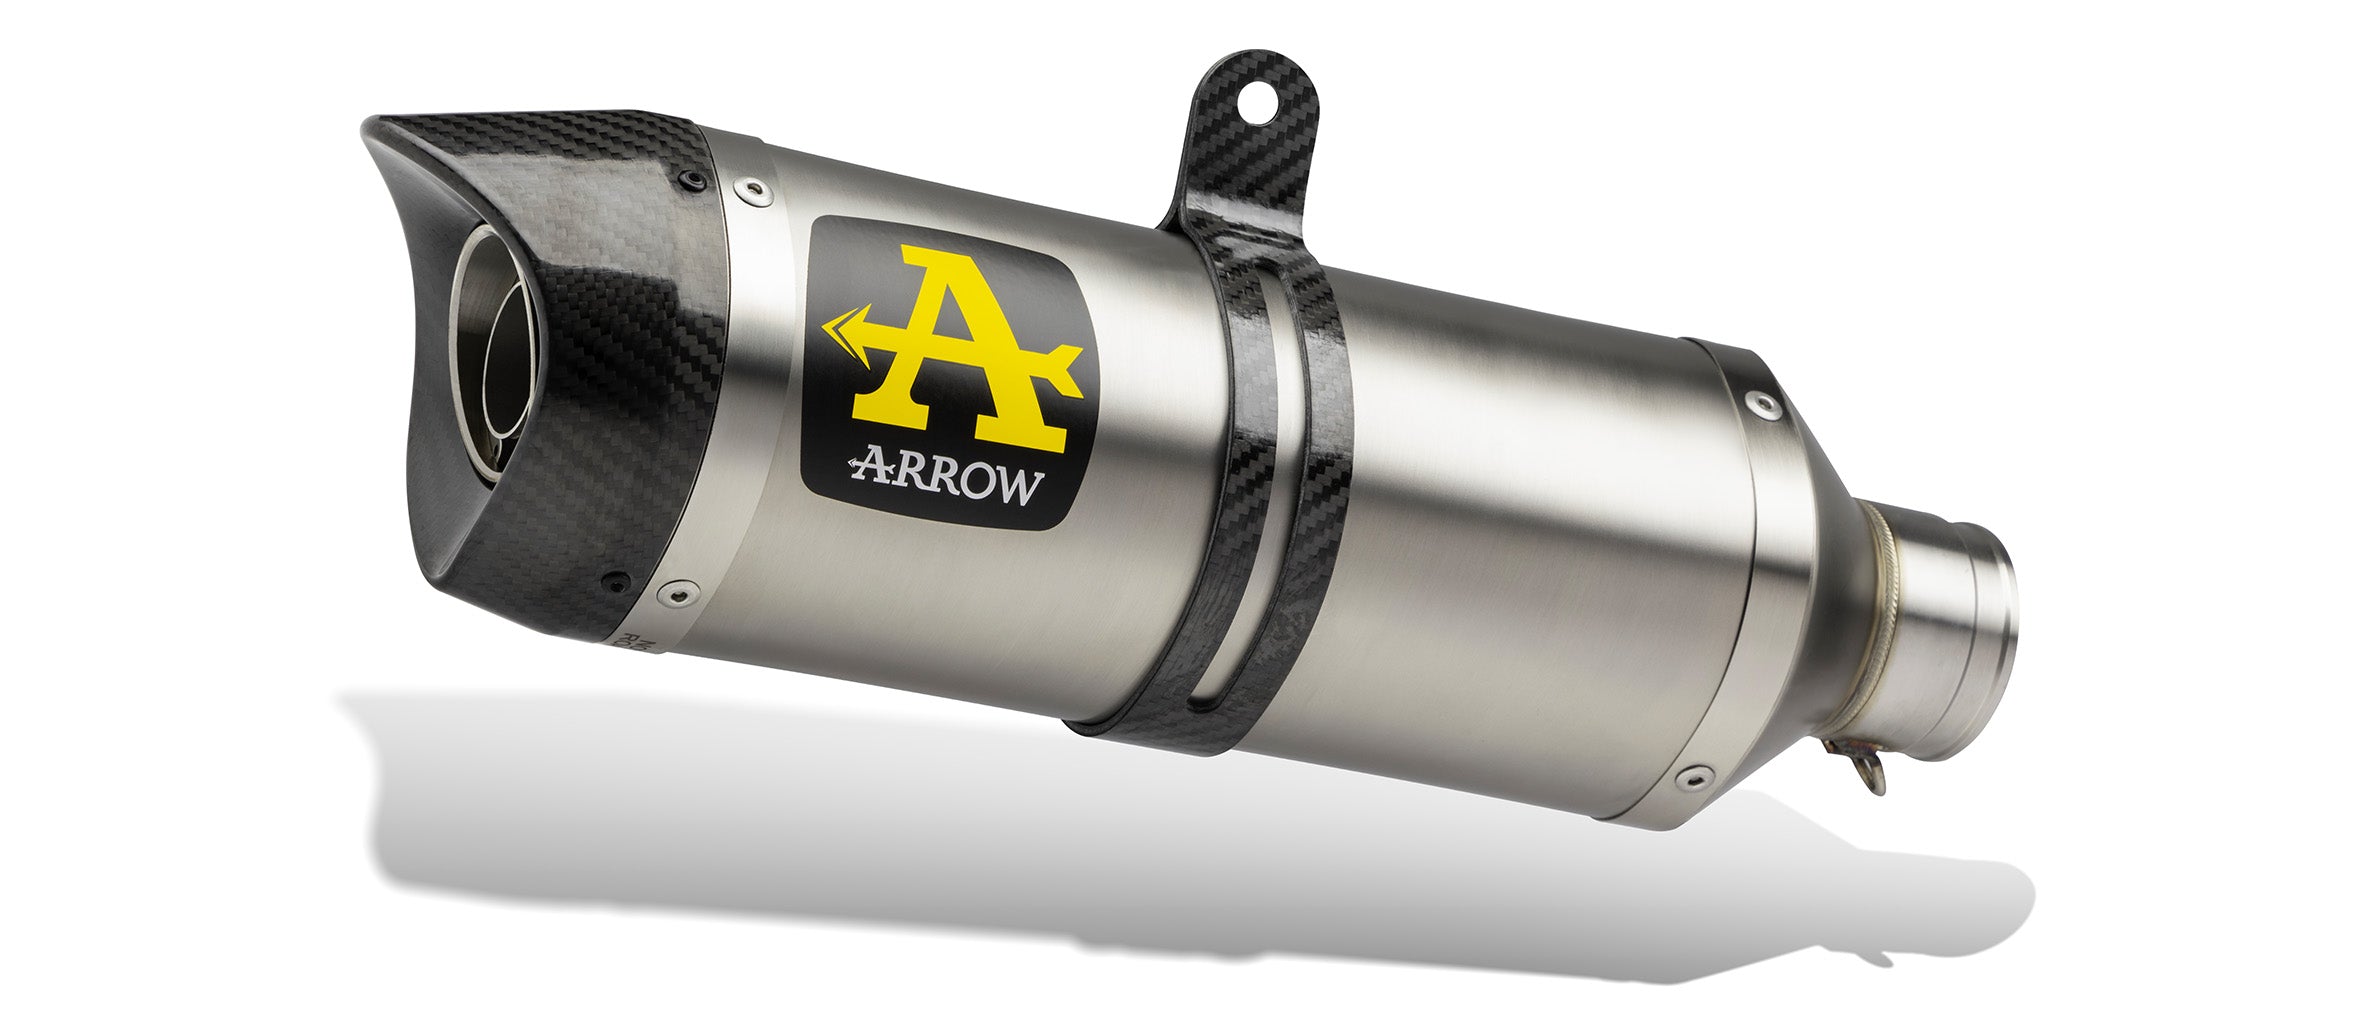 Arrow Suzuki Gsx-S 125 '17 Homologated Carbon Thunder Silencer With Welded Link Pipe For Arrow Collectors  71871mk